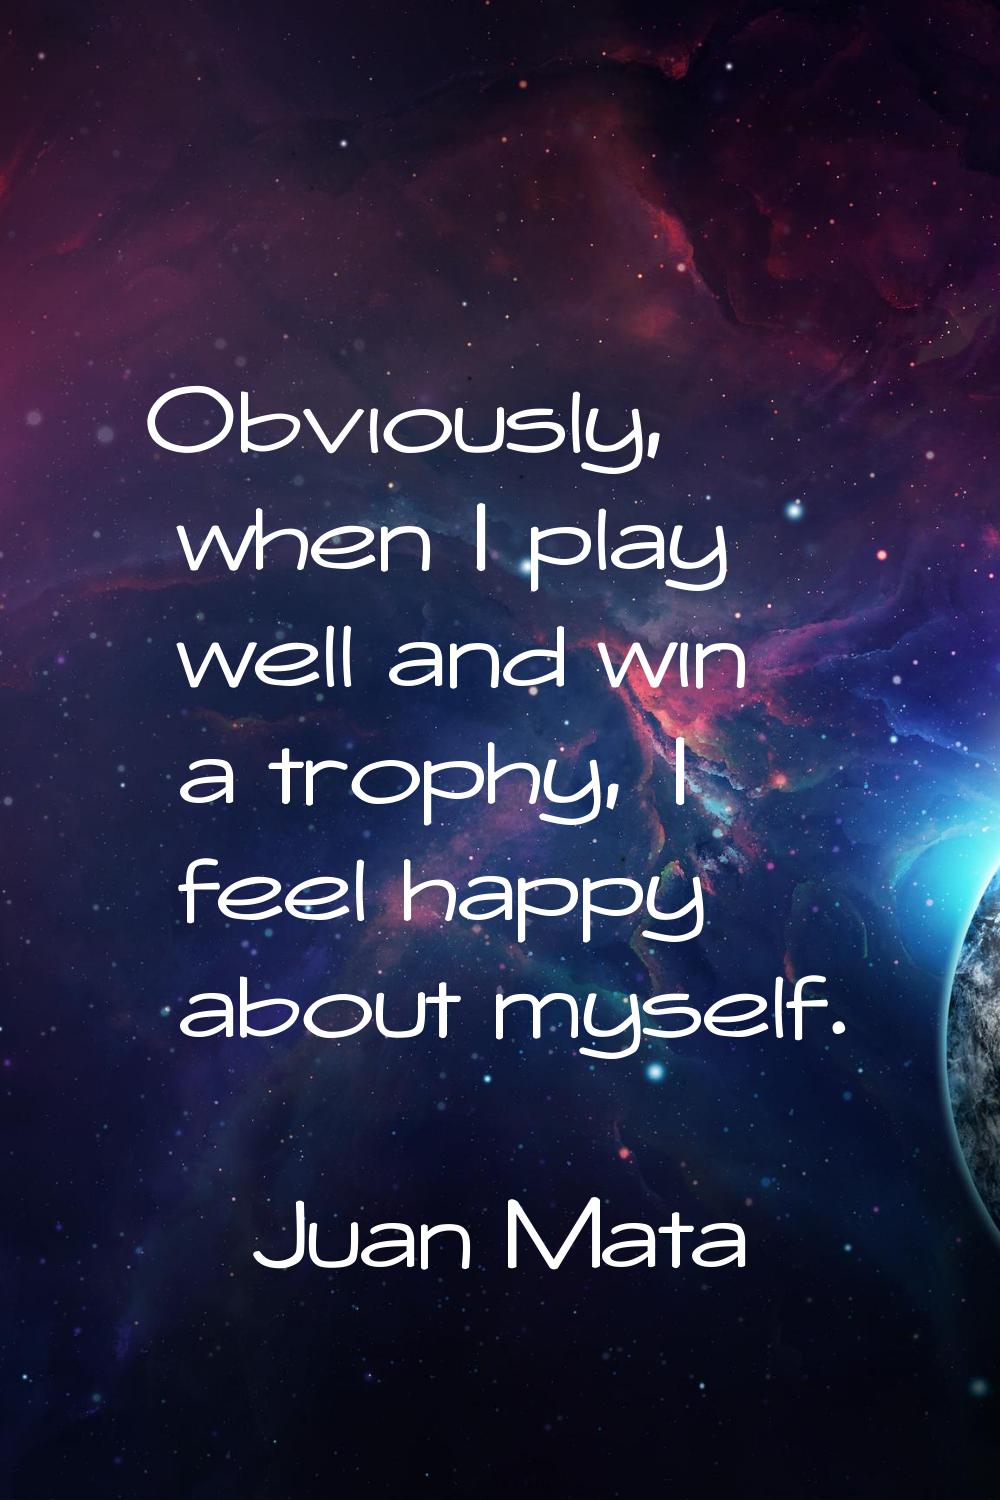 Obviously, when I play well and win a trophy, I feel happy about myself.